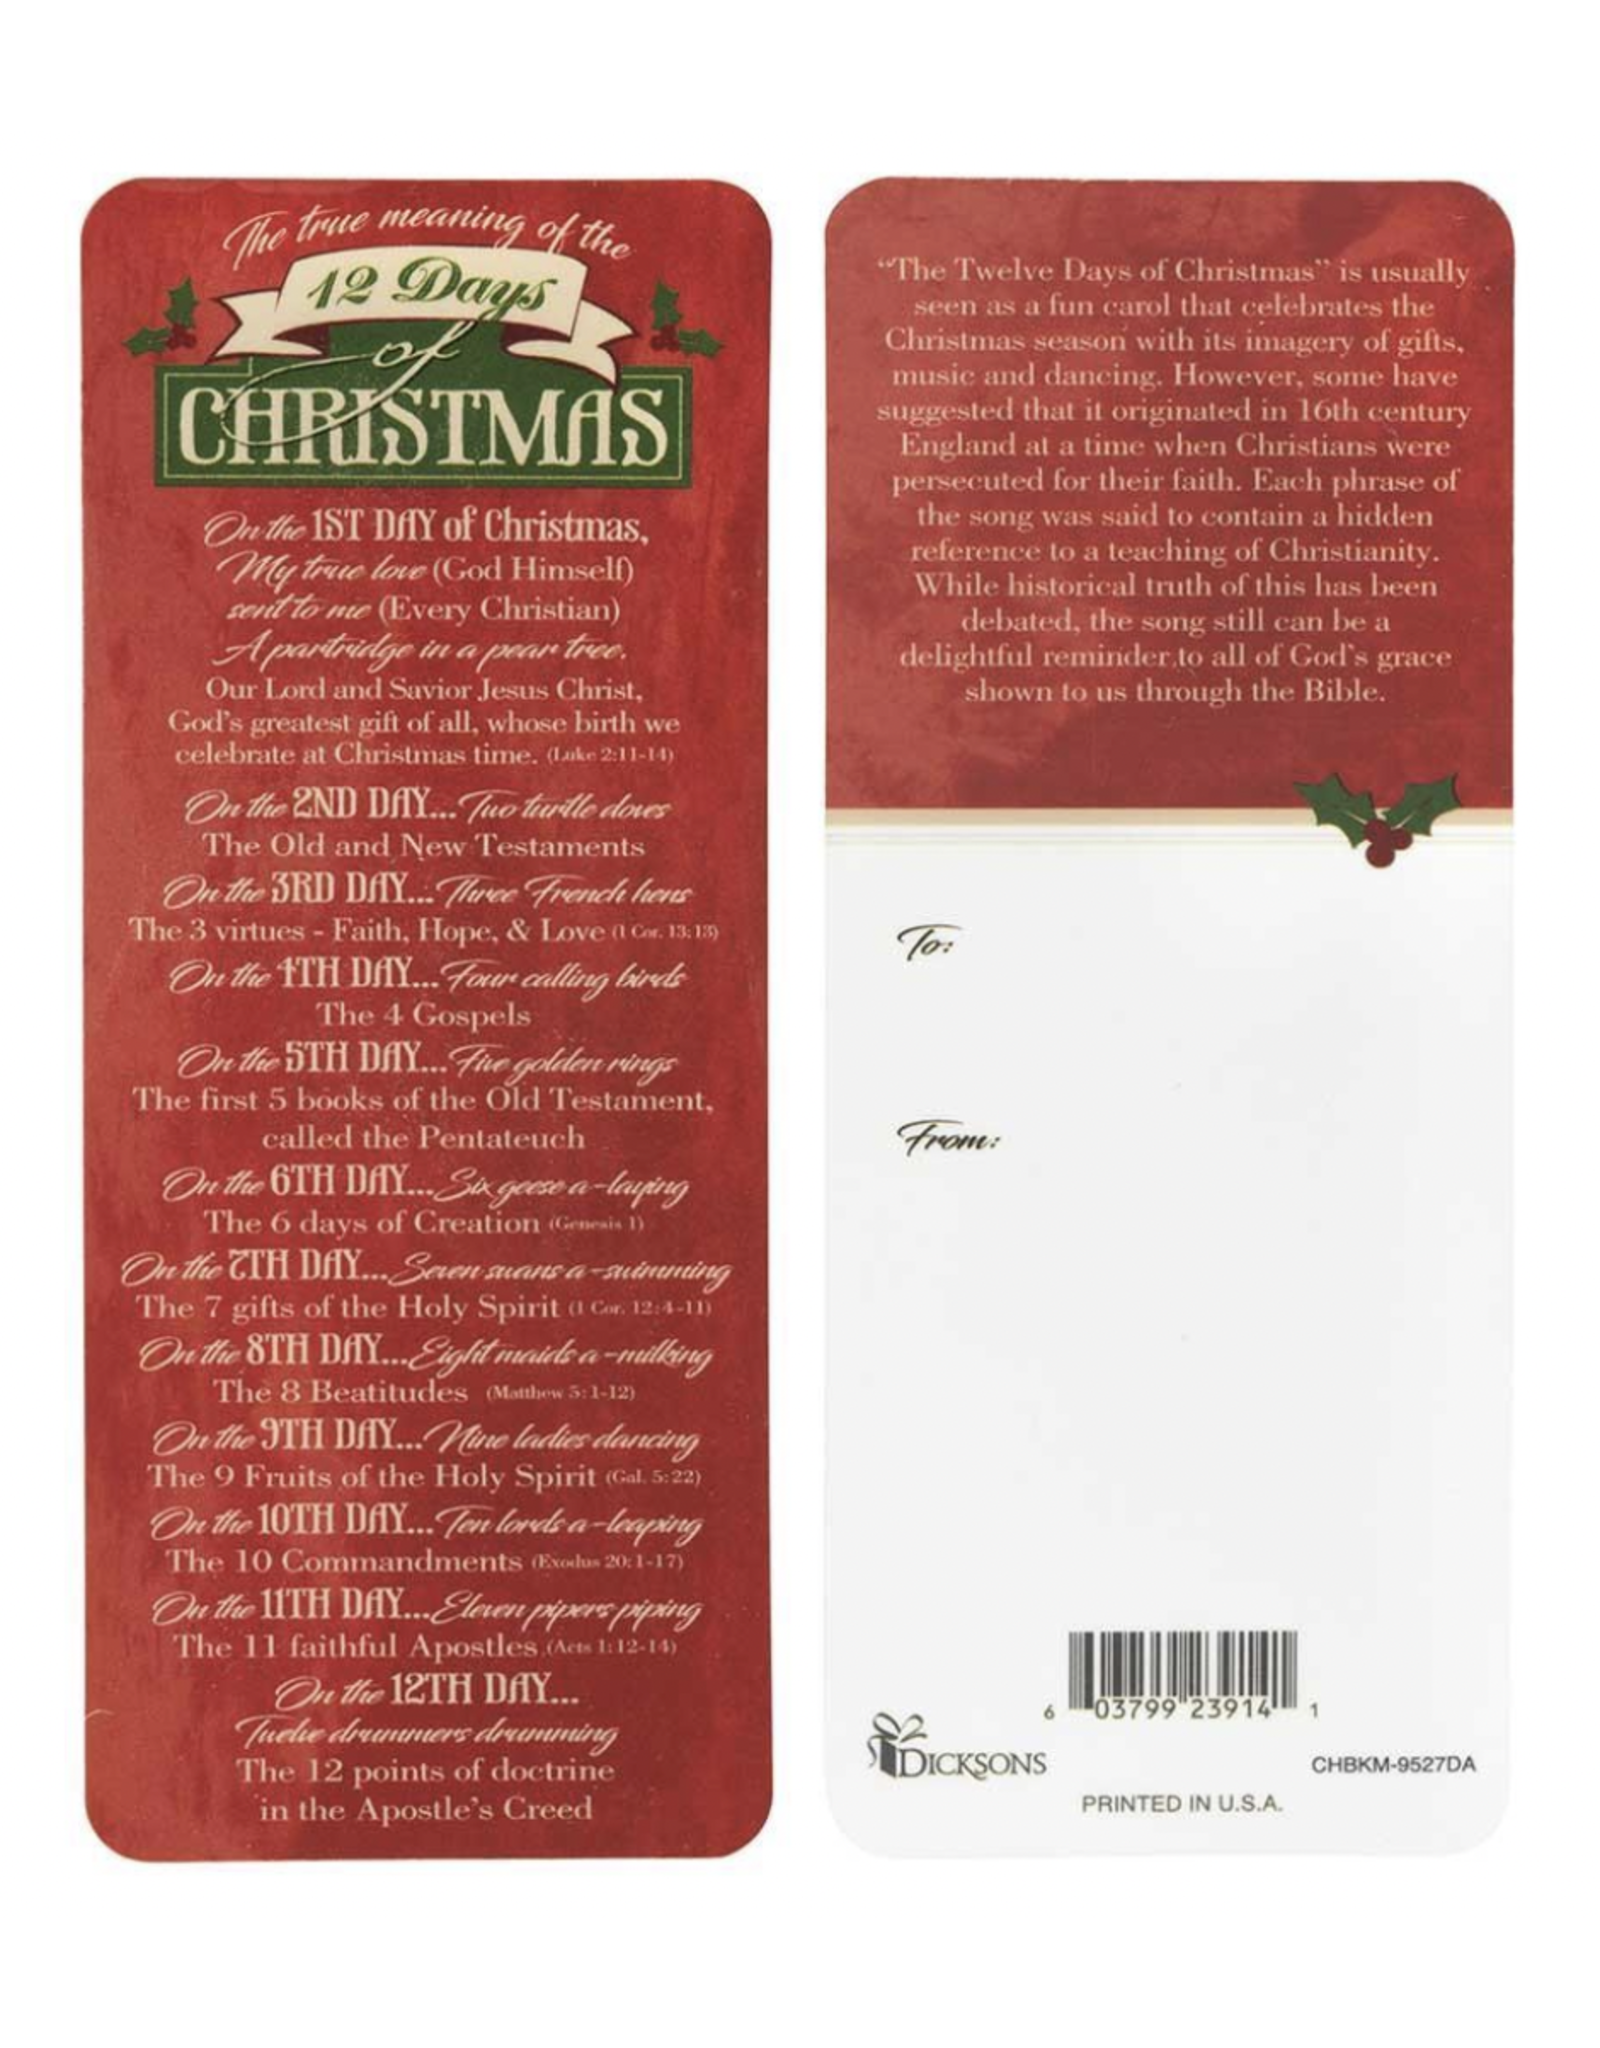 BookCard - The True Meaning of the 12 Days of Christmas